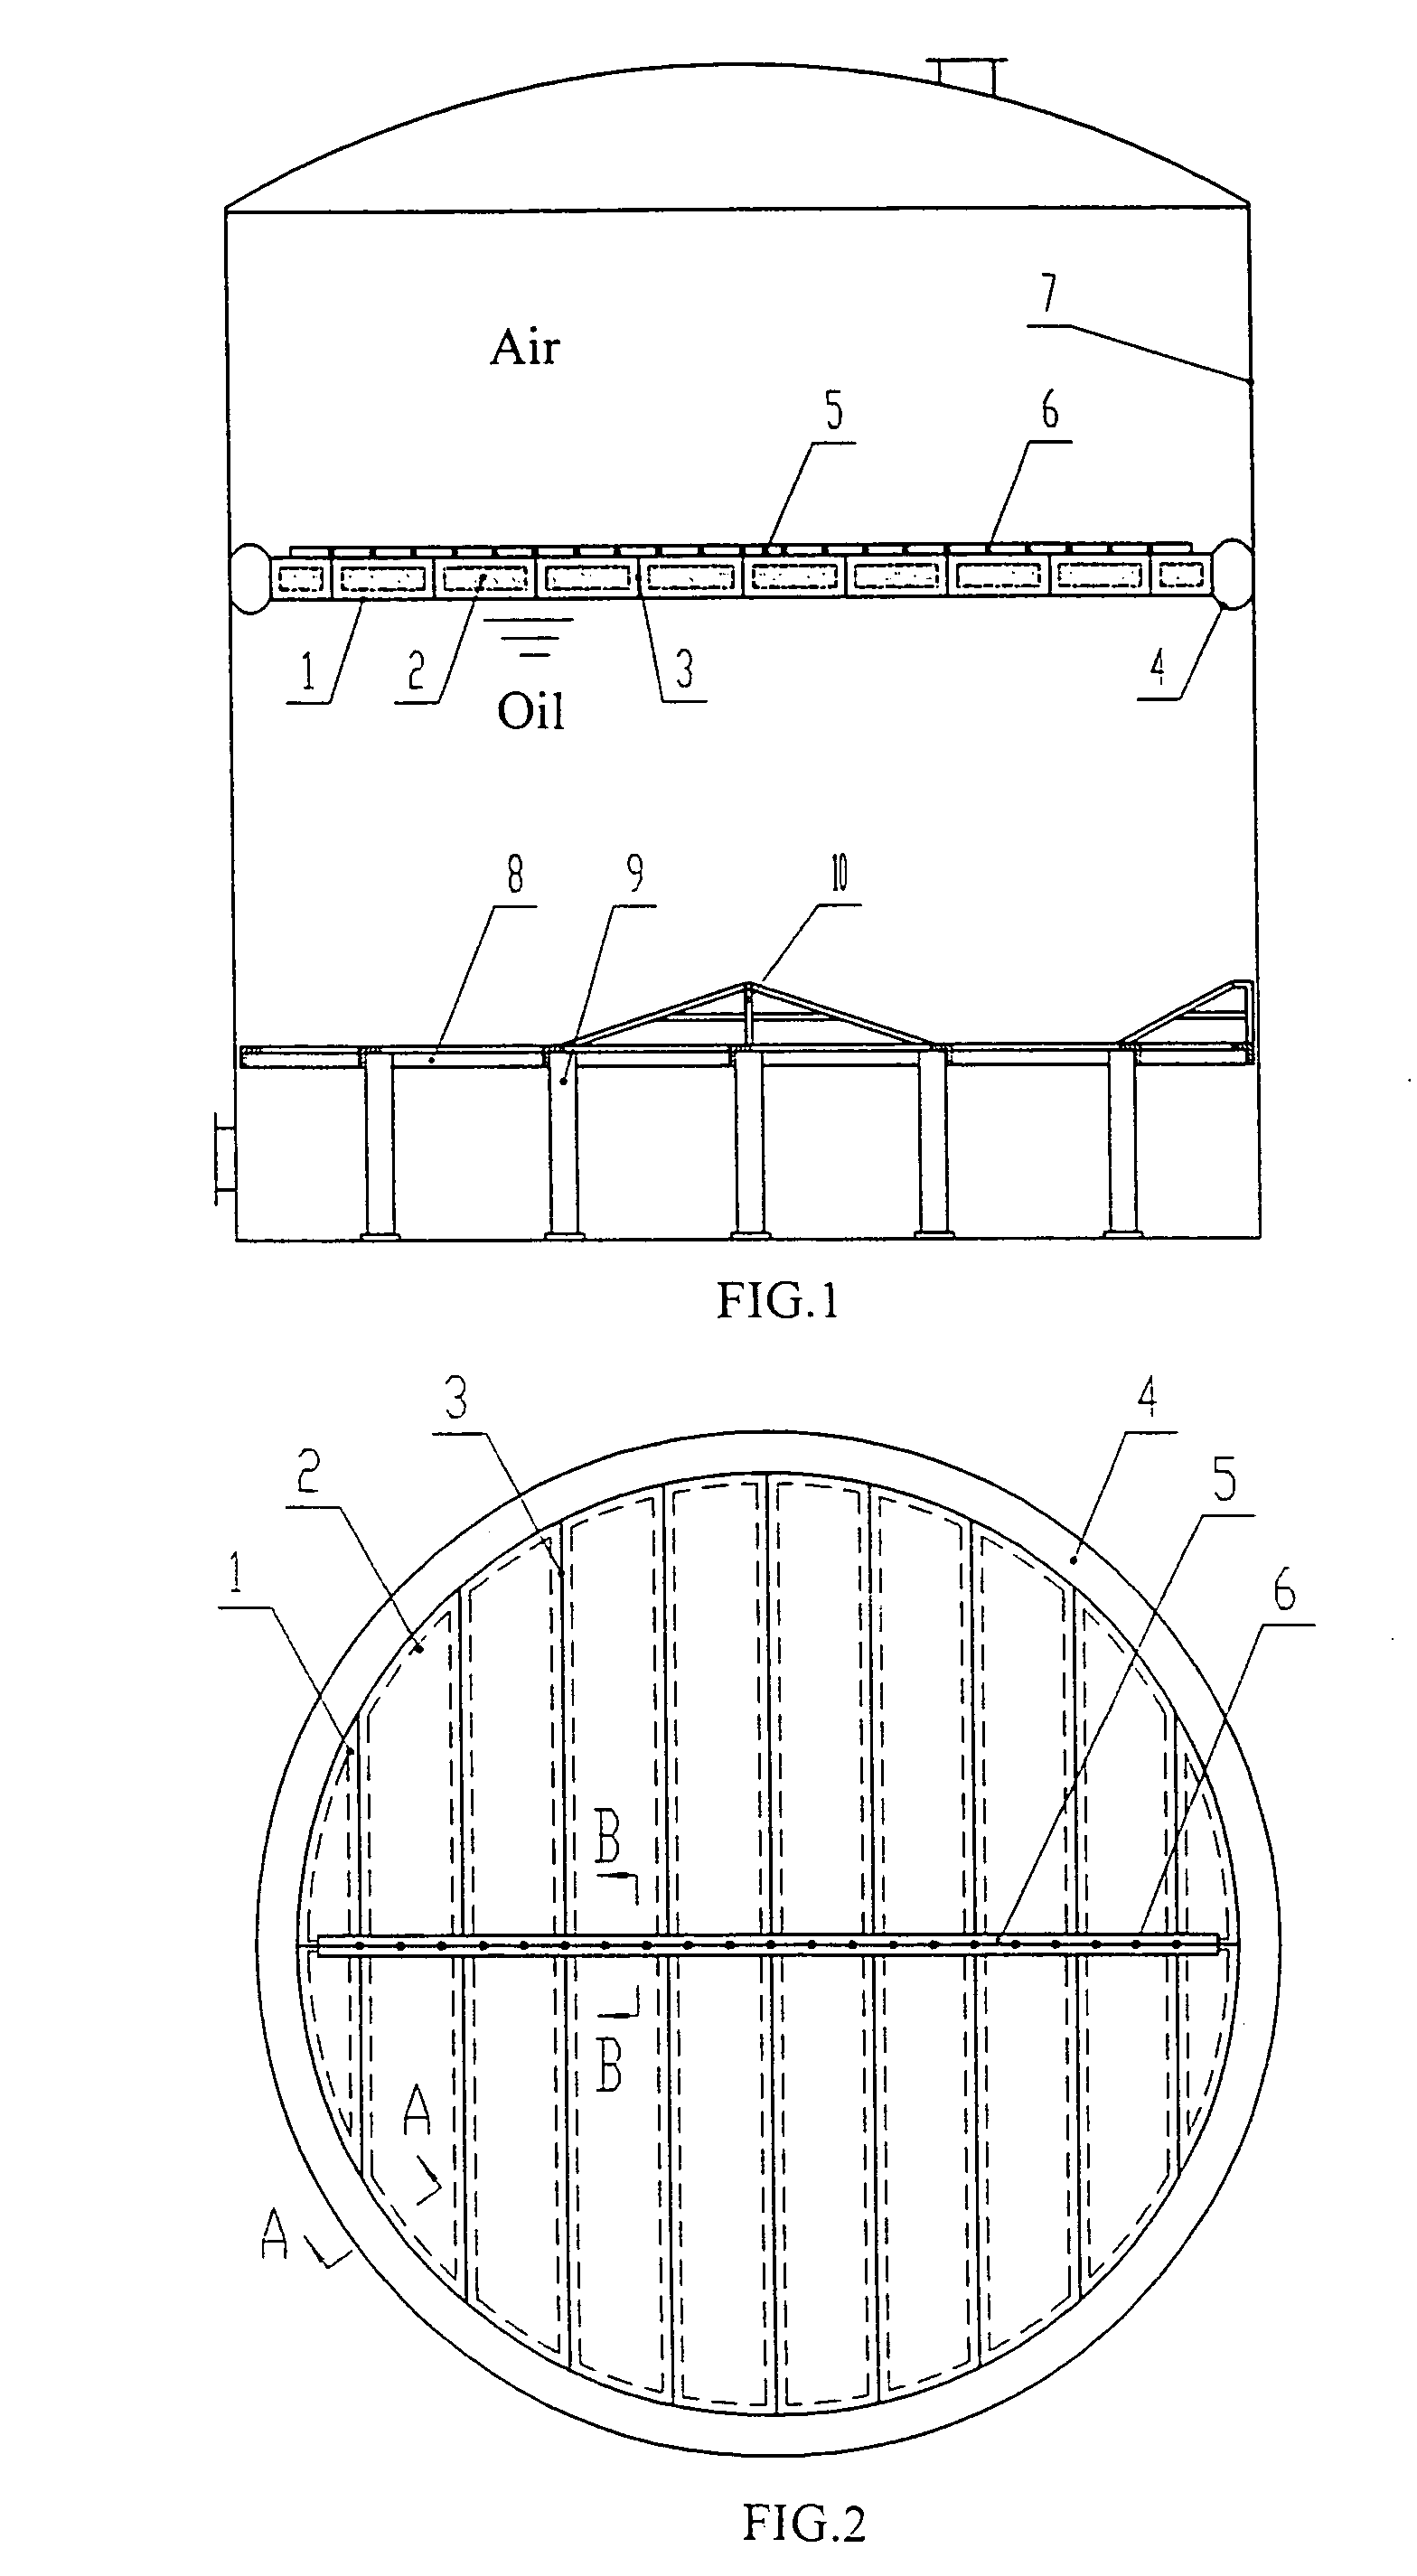 Oil storage tank equipped with a floating bed type inner floating roof